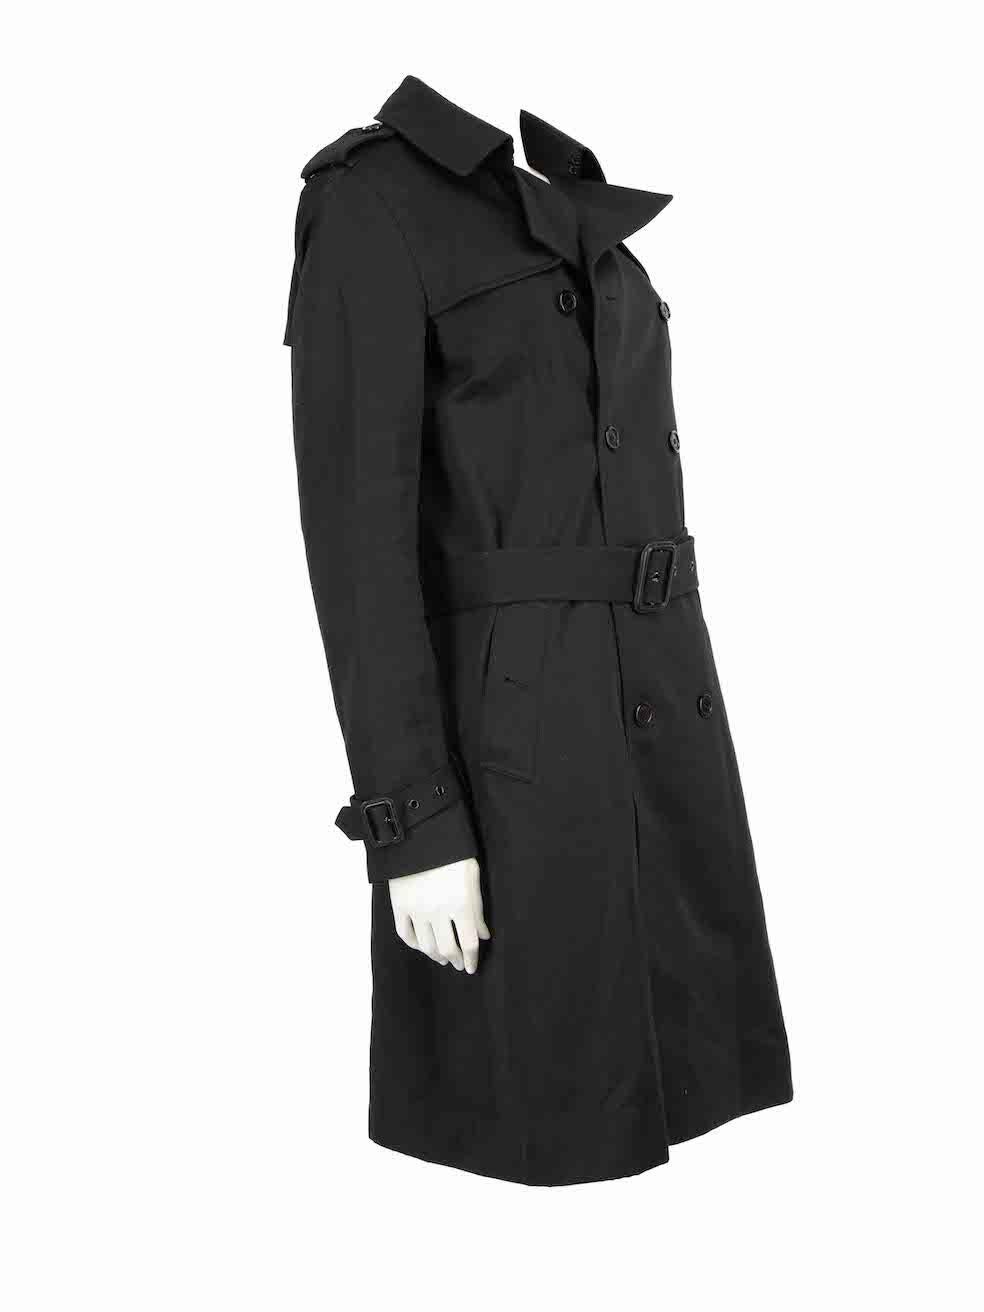 CONDITION is Very good. Hardly any visible wear to coat is evident on this used Saint Laurent designer resale item.
 
 
 
 Details
 
 
 Black
 
 Polyester
 
 Trench coat
 
 Double breasted
 
 Belted
 
 Button up fastening
 
 Buckle cuffs
 
 2x Side